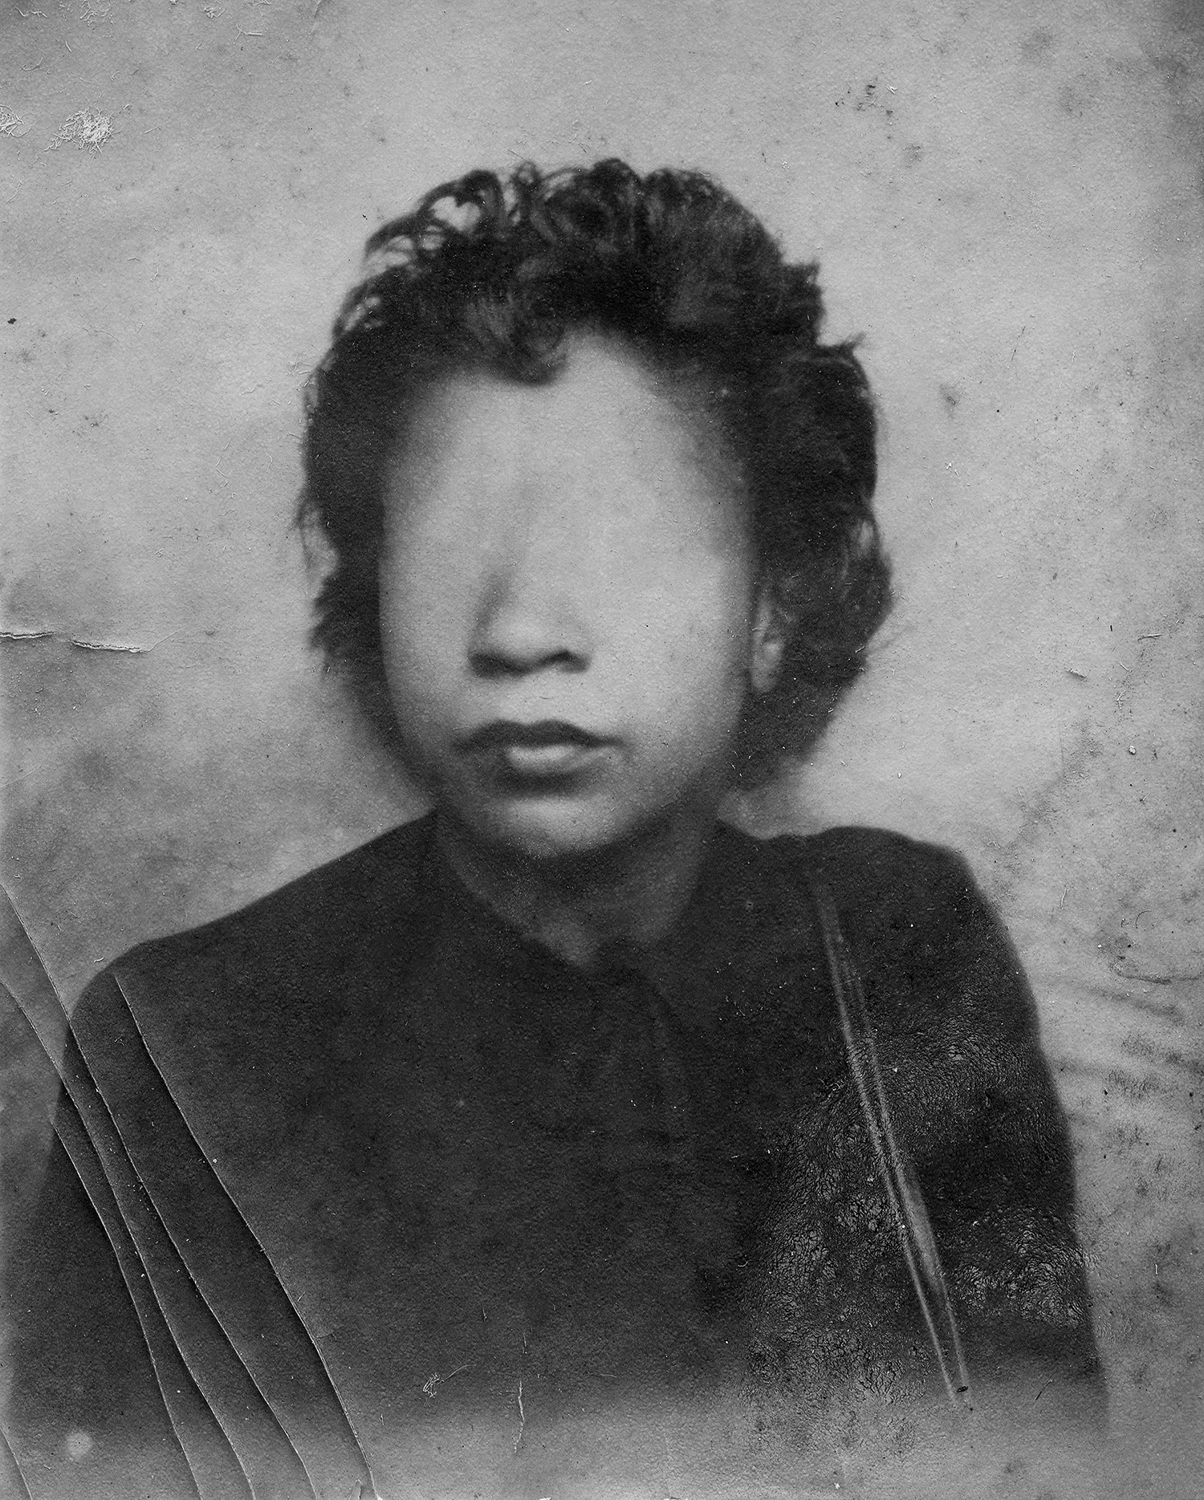 Black and white portrait with face obscured